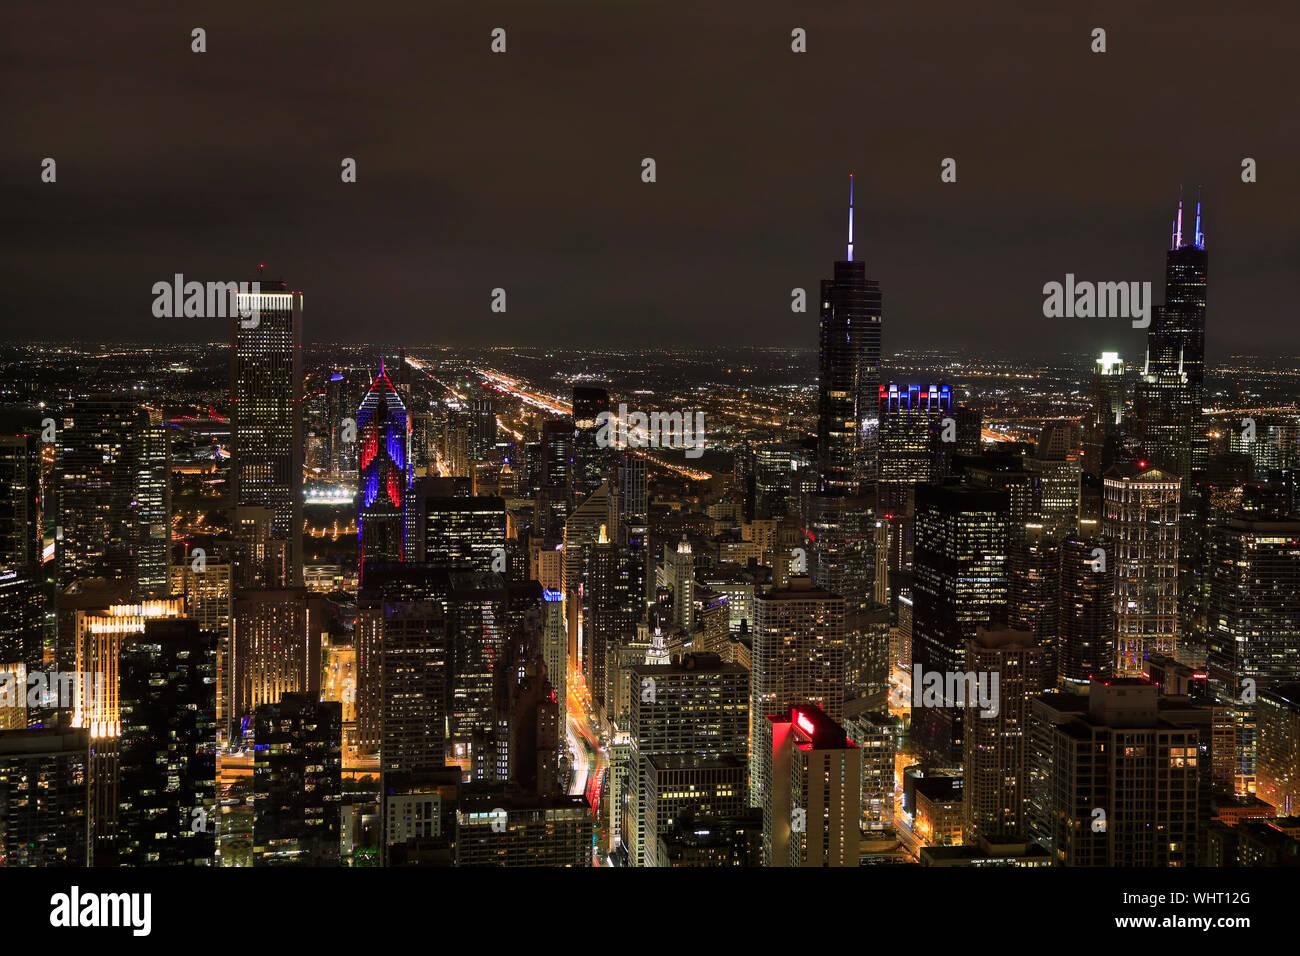 Aerial view of Chicago skyline at night Stock Photo